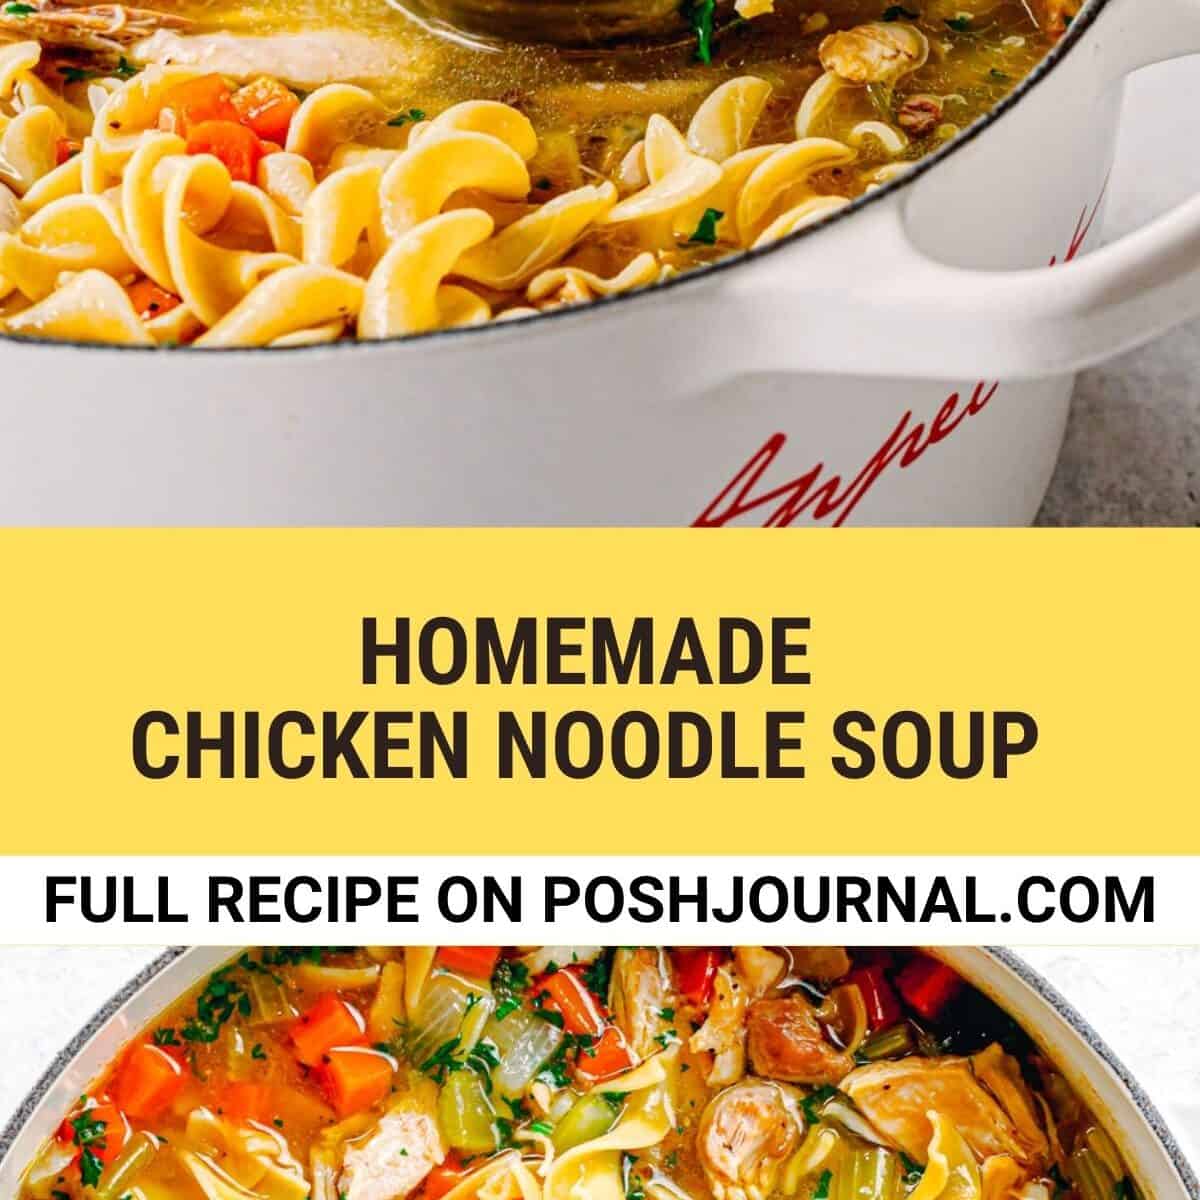 Homemade Chicken Noodle Soup Recipe.